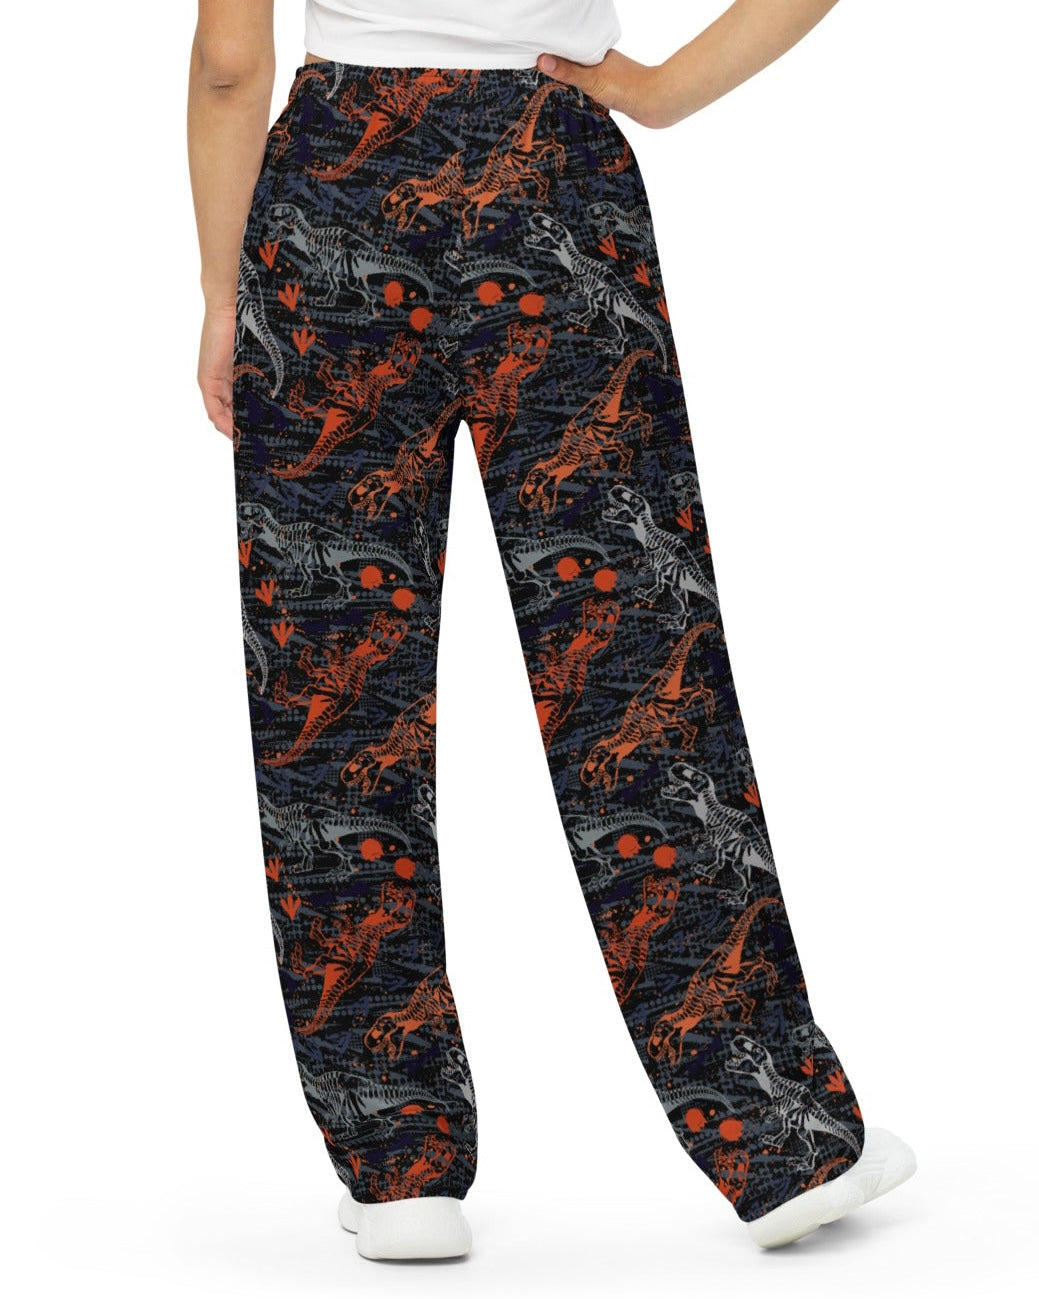 Back view of model rocking One Stop Rave's T-Wrecked Wide Leg Pants with a distinct dinosaur print.